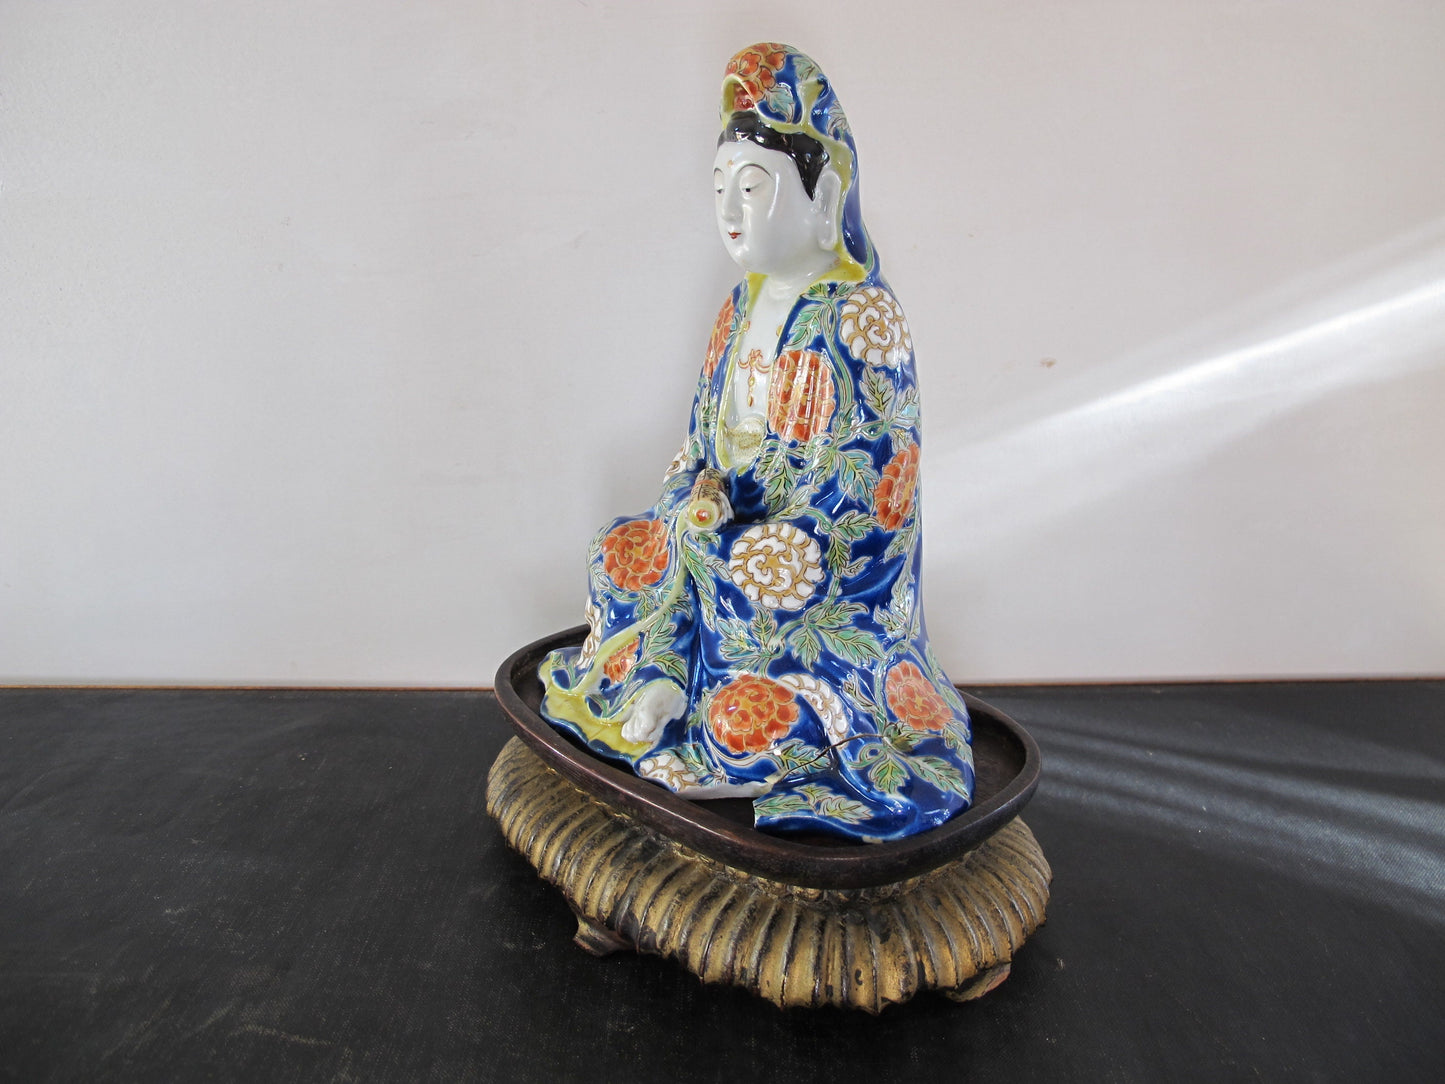 Statuette Guanyin Famille Bleu Chinese Polychrome Buddhist Bodhisattva Porcelain c. 1900 on Lotus Stand Skinner Auctioneers Tag Precommunist